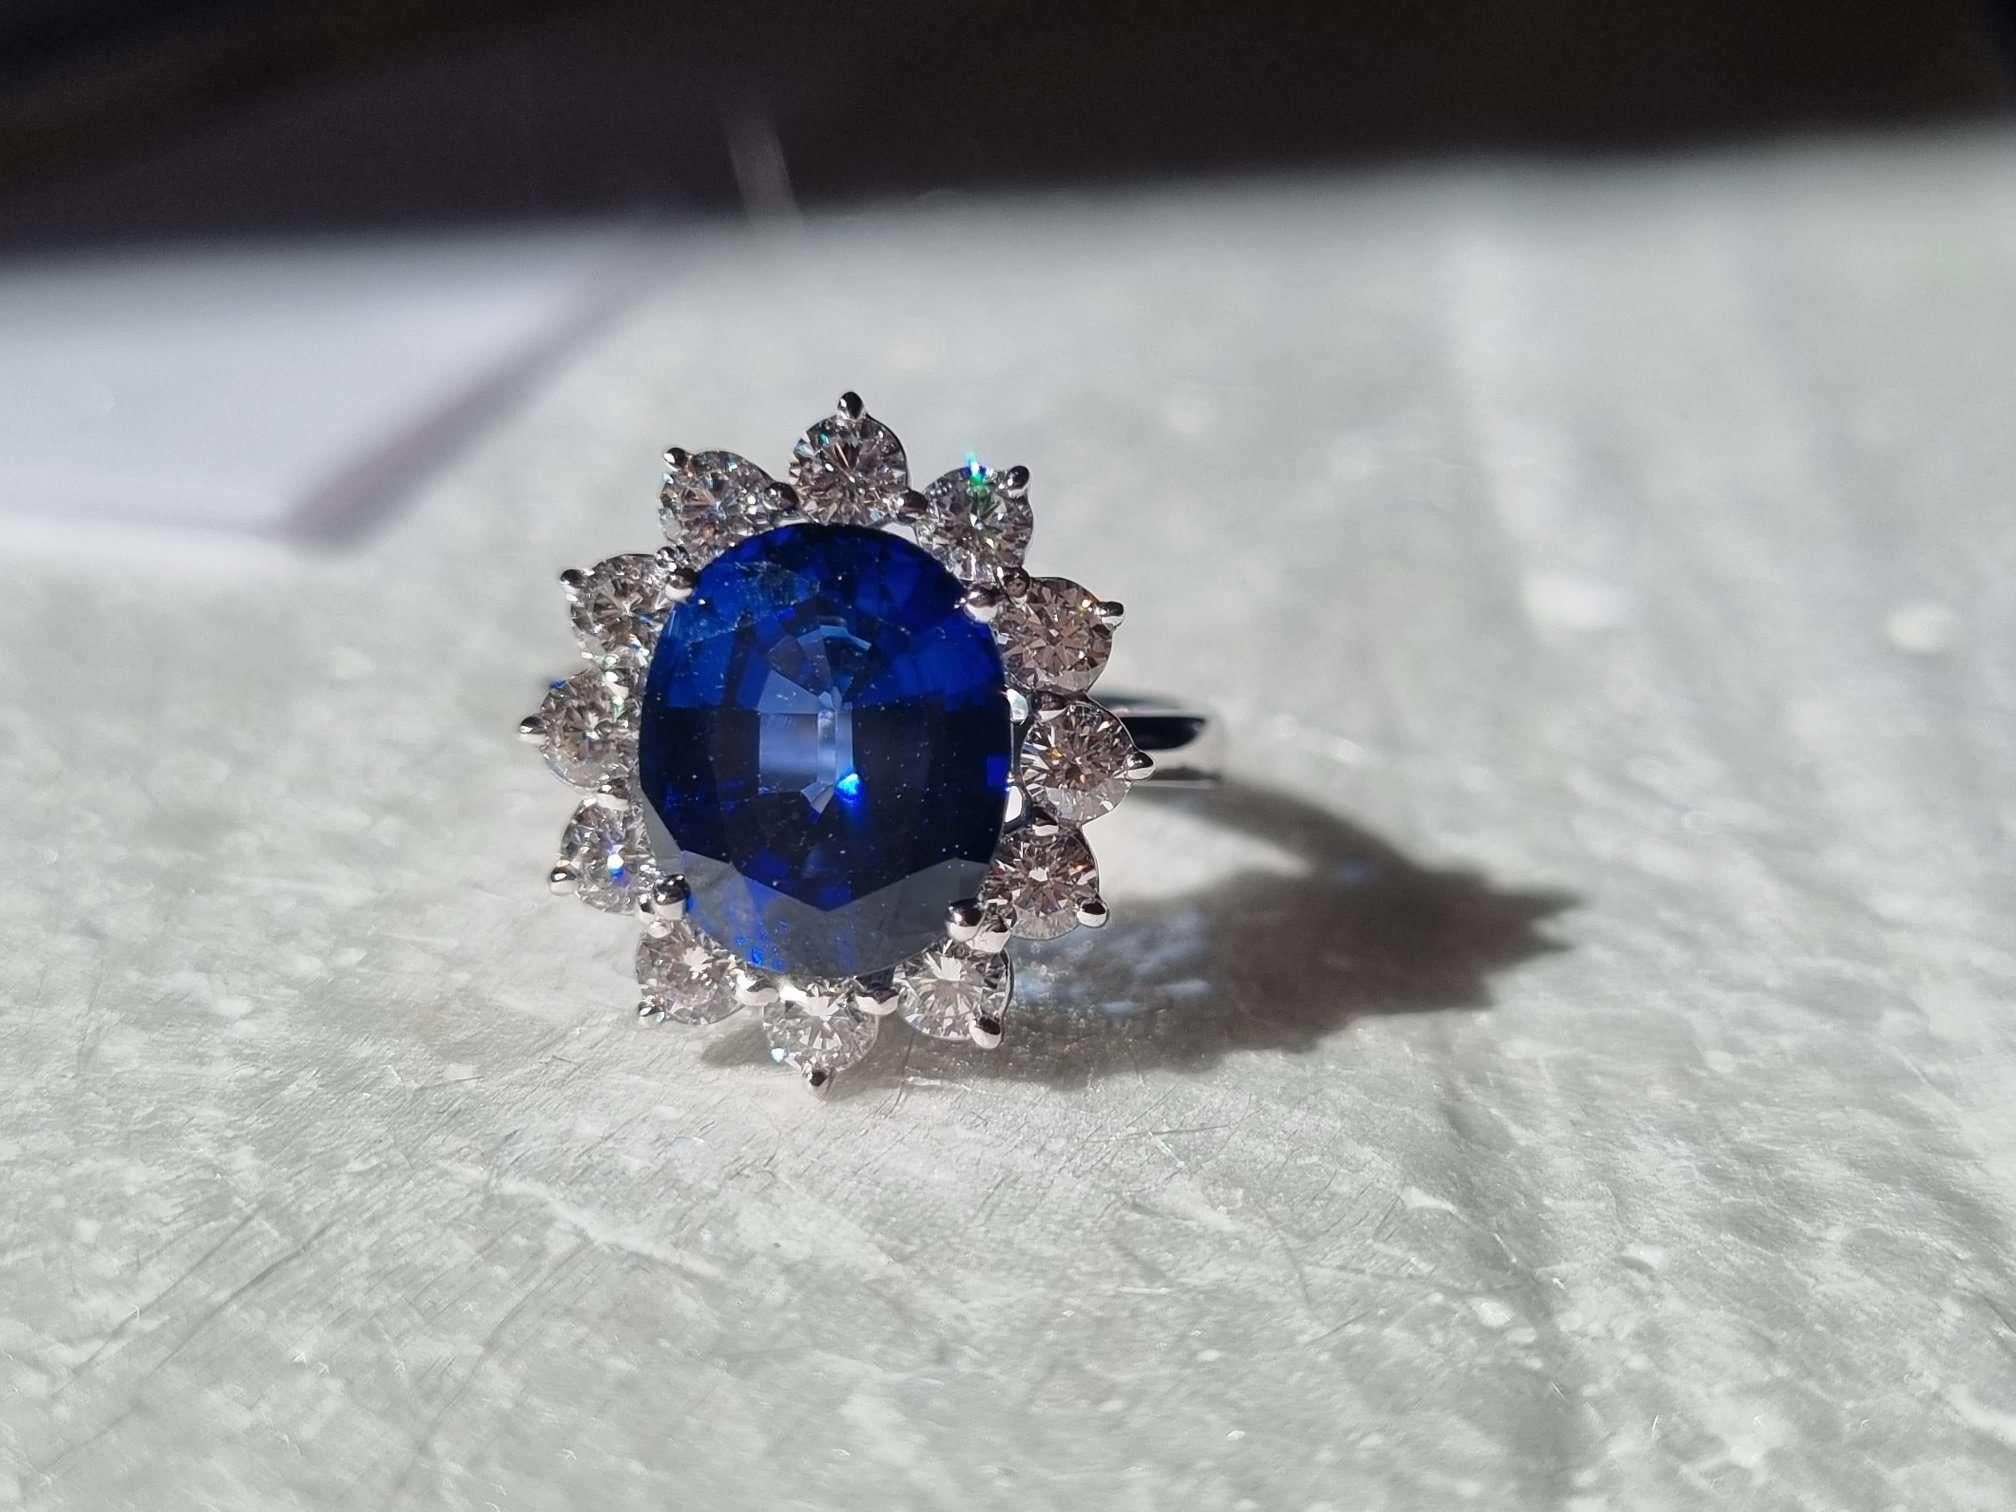 This immense oval-cut halo ring is truly glorious! It features a lush 5.98 carat Royal Blue Sapphire, lab grown, surrounded by a halo of gorgeous natural brilliant cut VVS diamonds totaling 1.00 ct, in a solid 18ct White Gold setting. This is such a